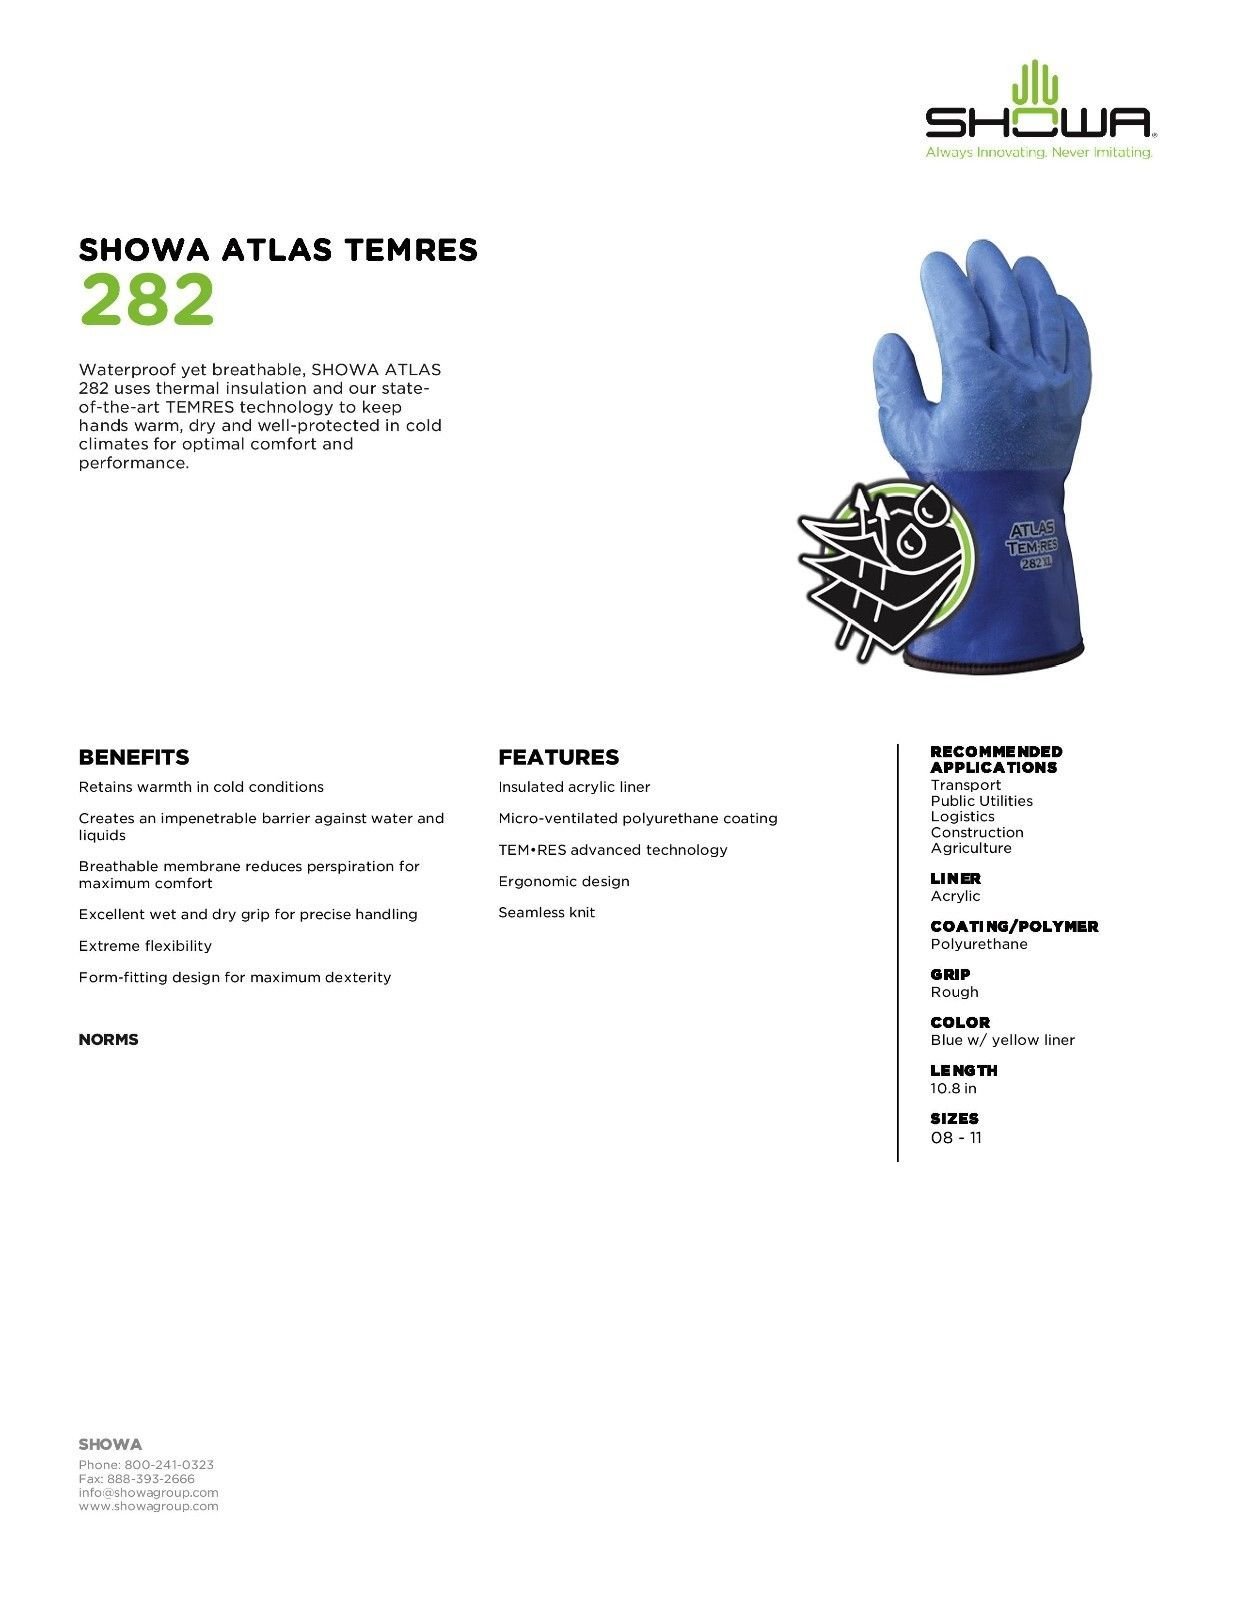 Atlas Showa Best 282 TEMRES Insulated Gloves, Waterproof/Breathable TEMRES Technology, Oil Resistant Rough Textured Coating, Acrylic Insulation, Medium (1 Pair)